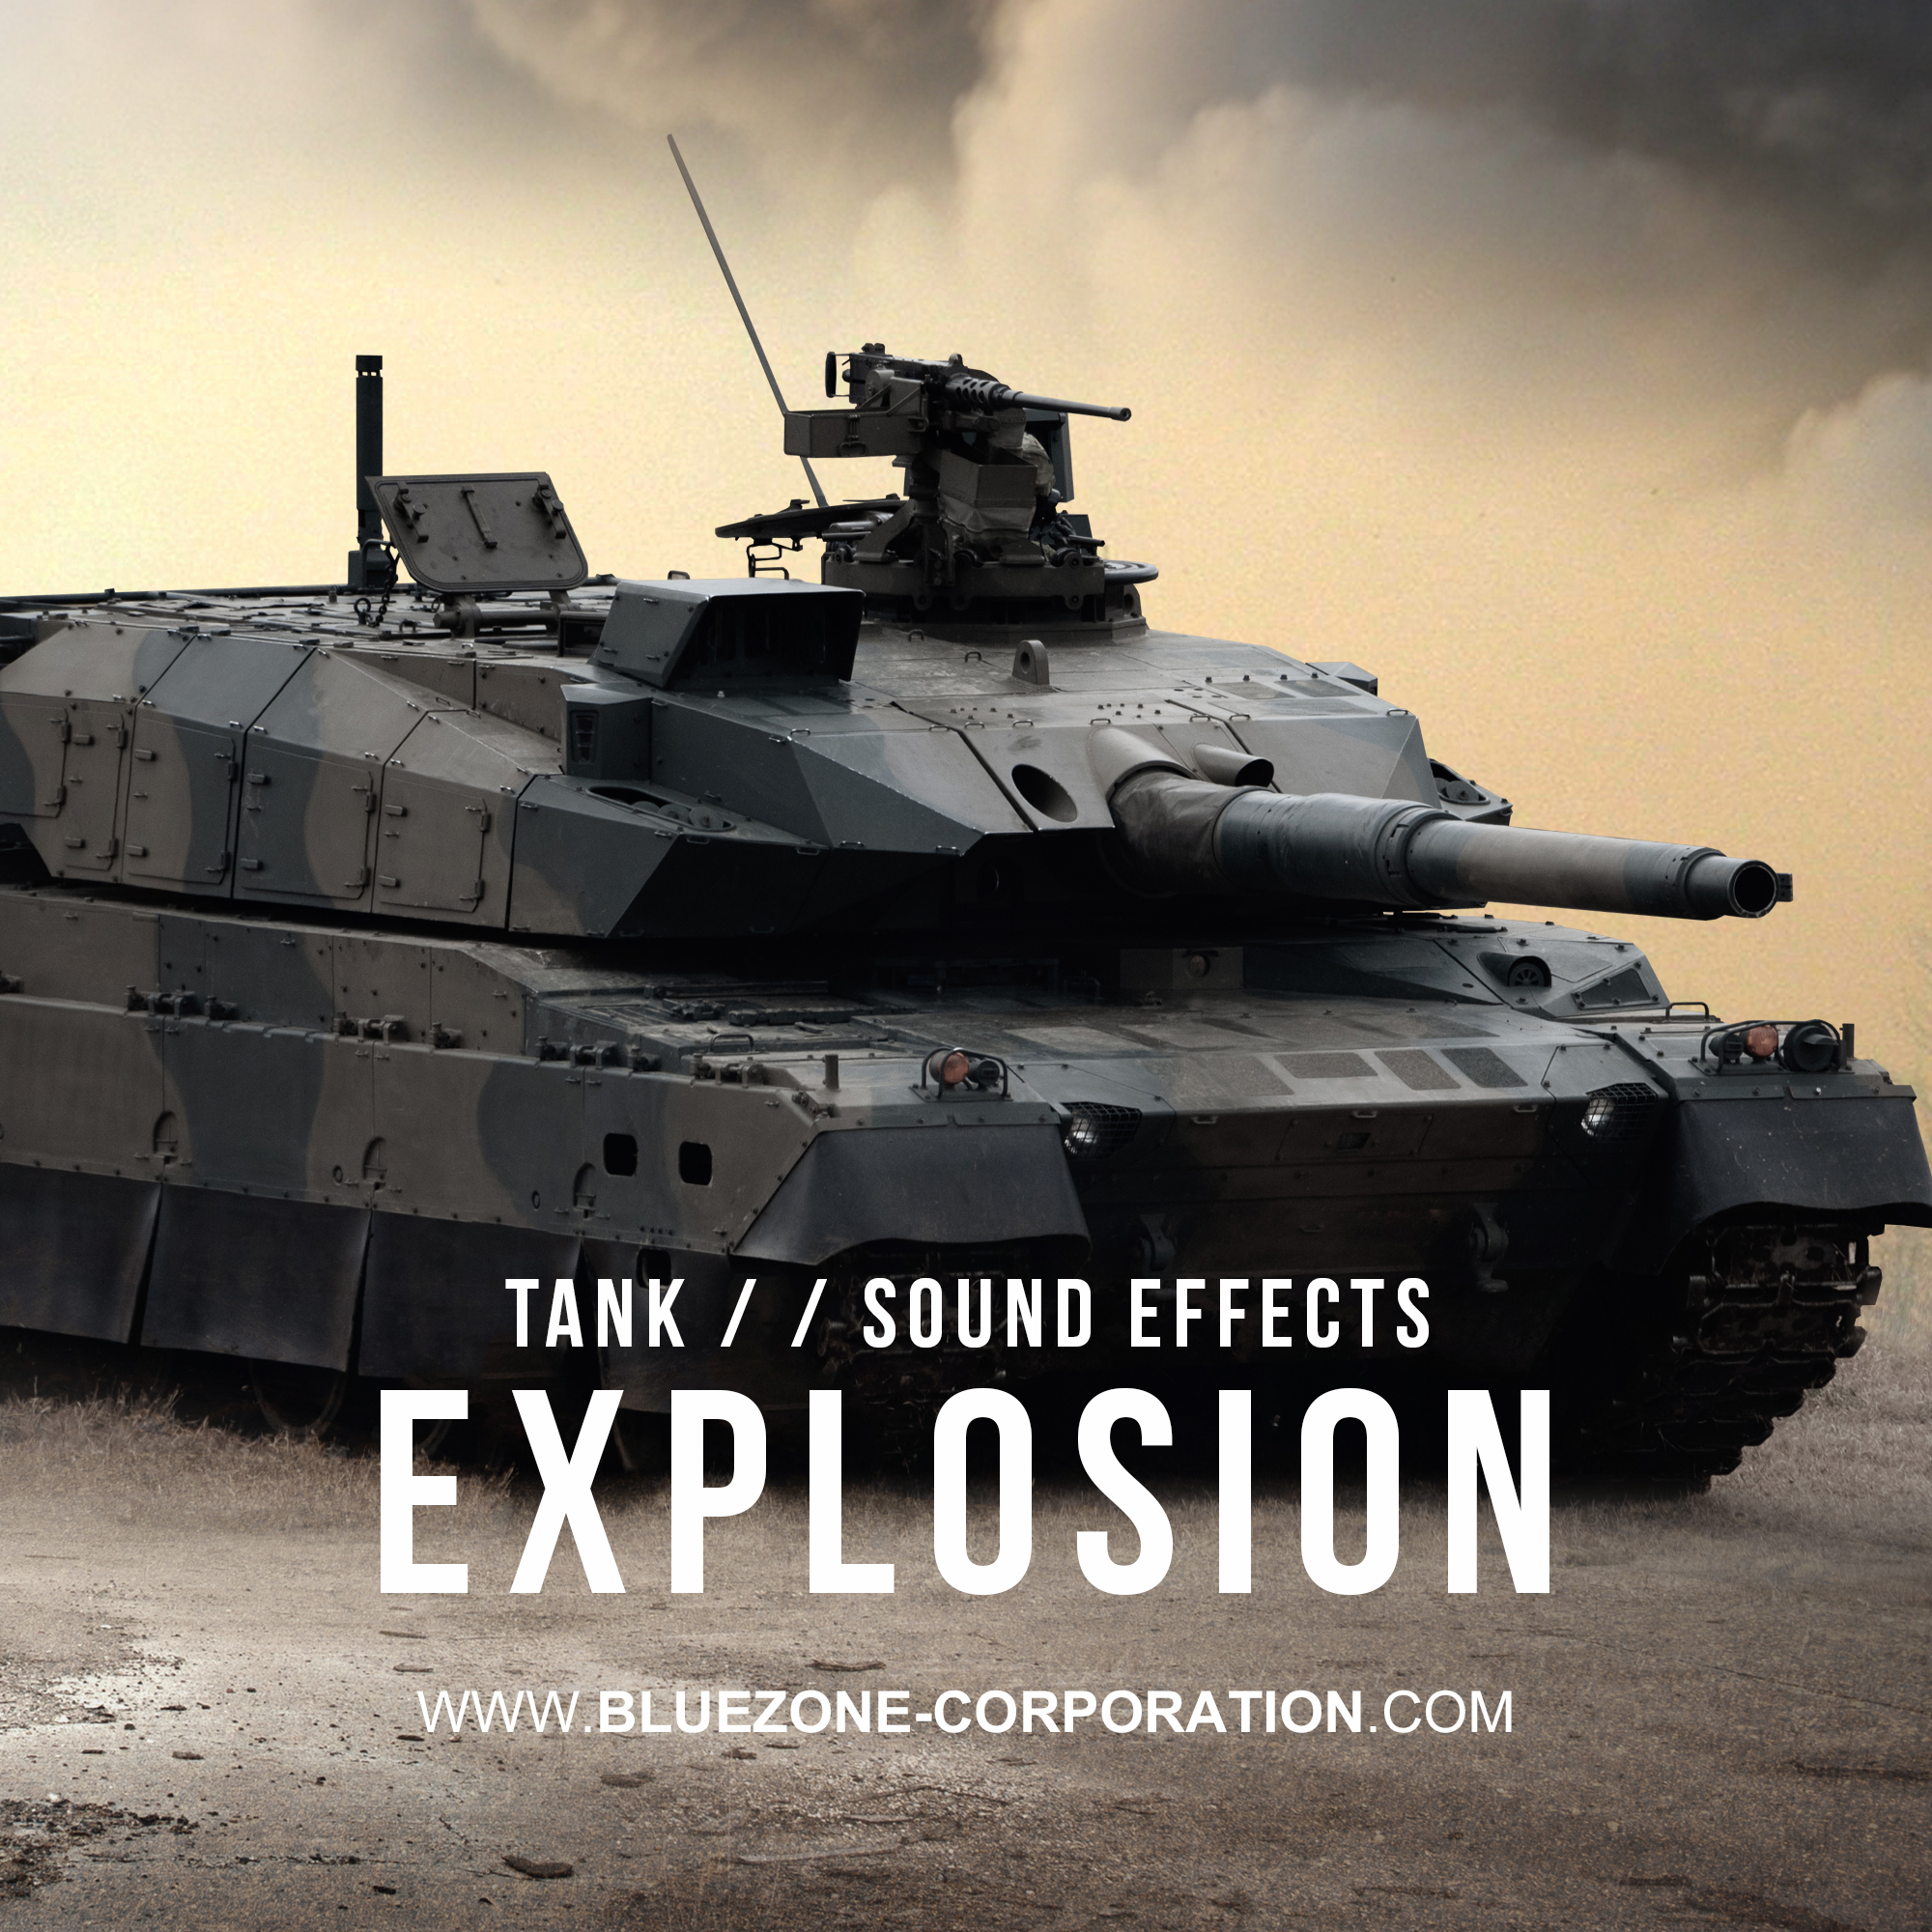 Bluezone releases 'Tank - Explosion Sound Effects'